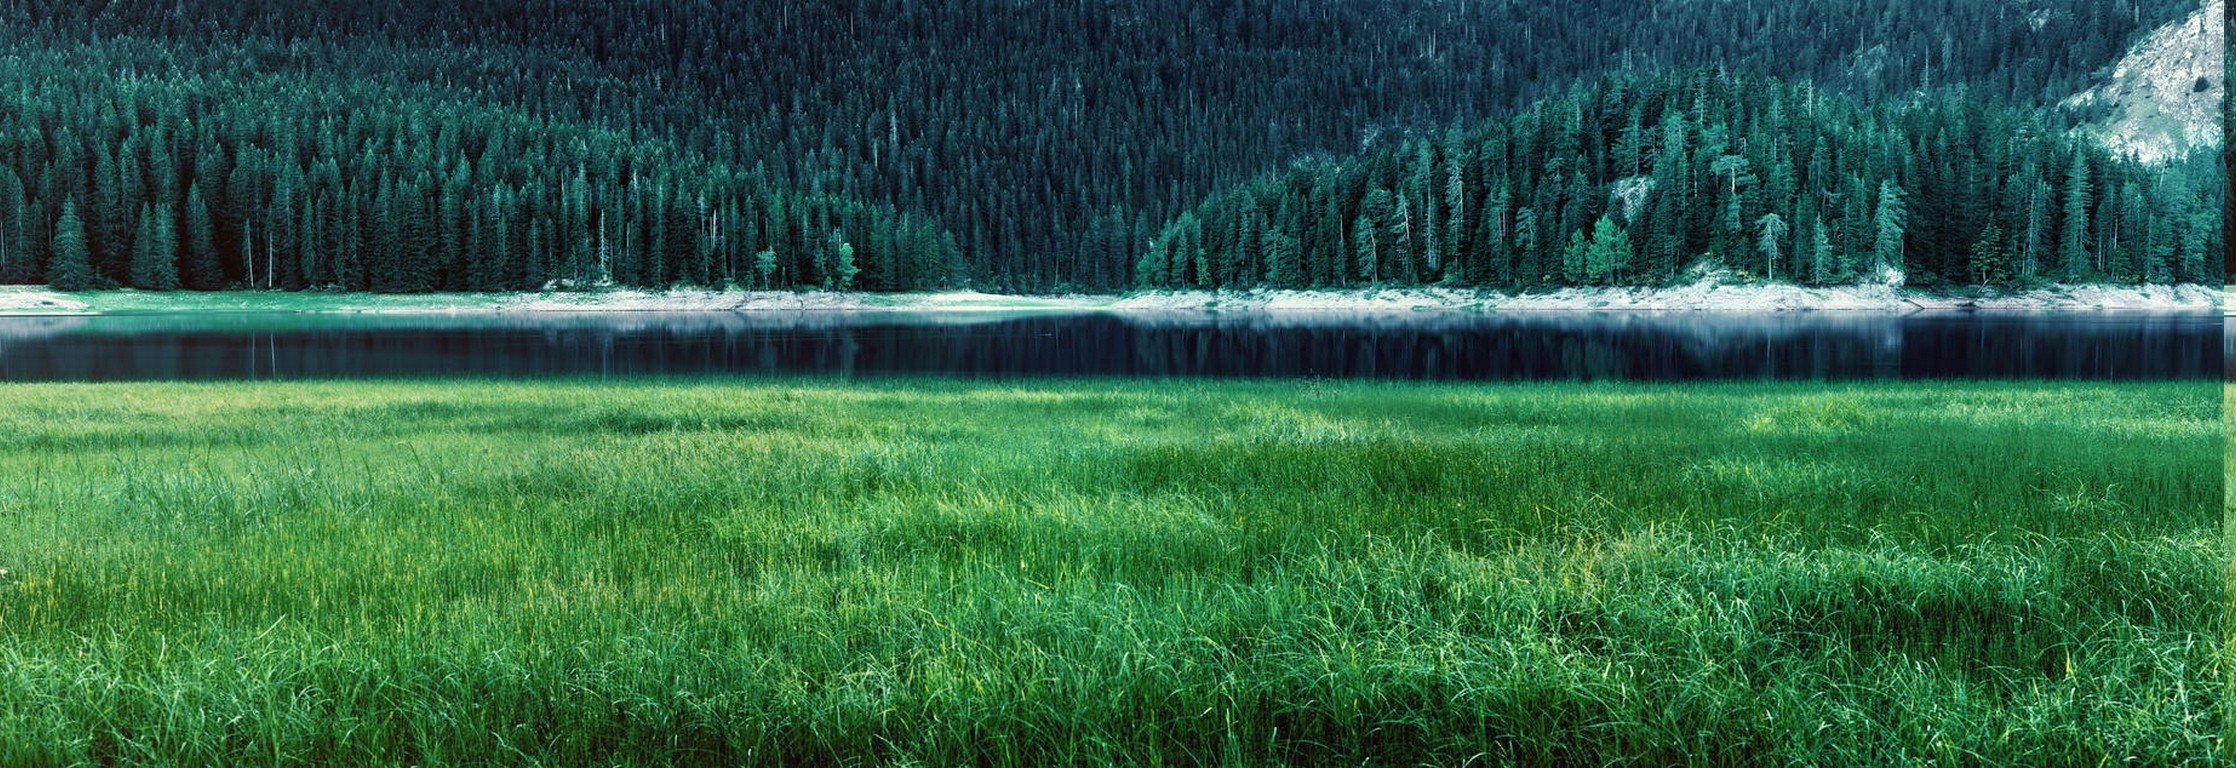 green, Lake, Mountain, Forest, Grass, Spring, Water, Panoramas, Trees, Nature, Landscape Wallpaper